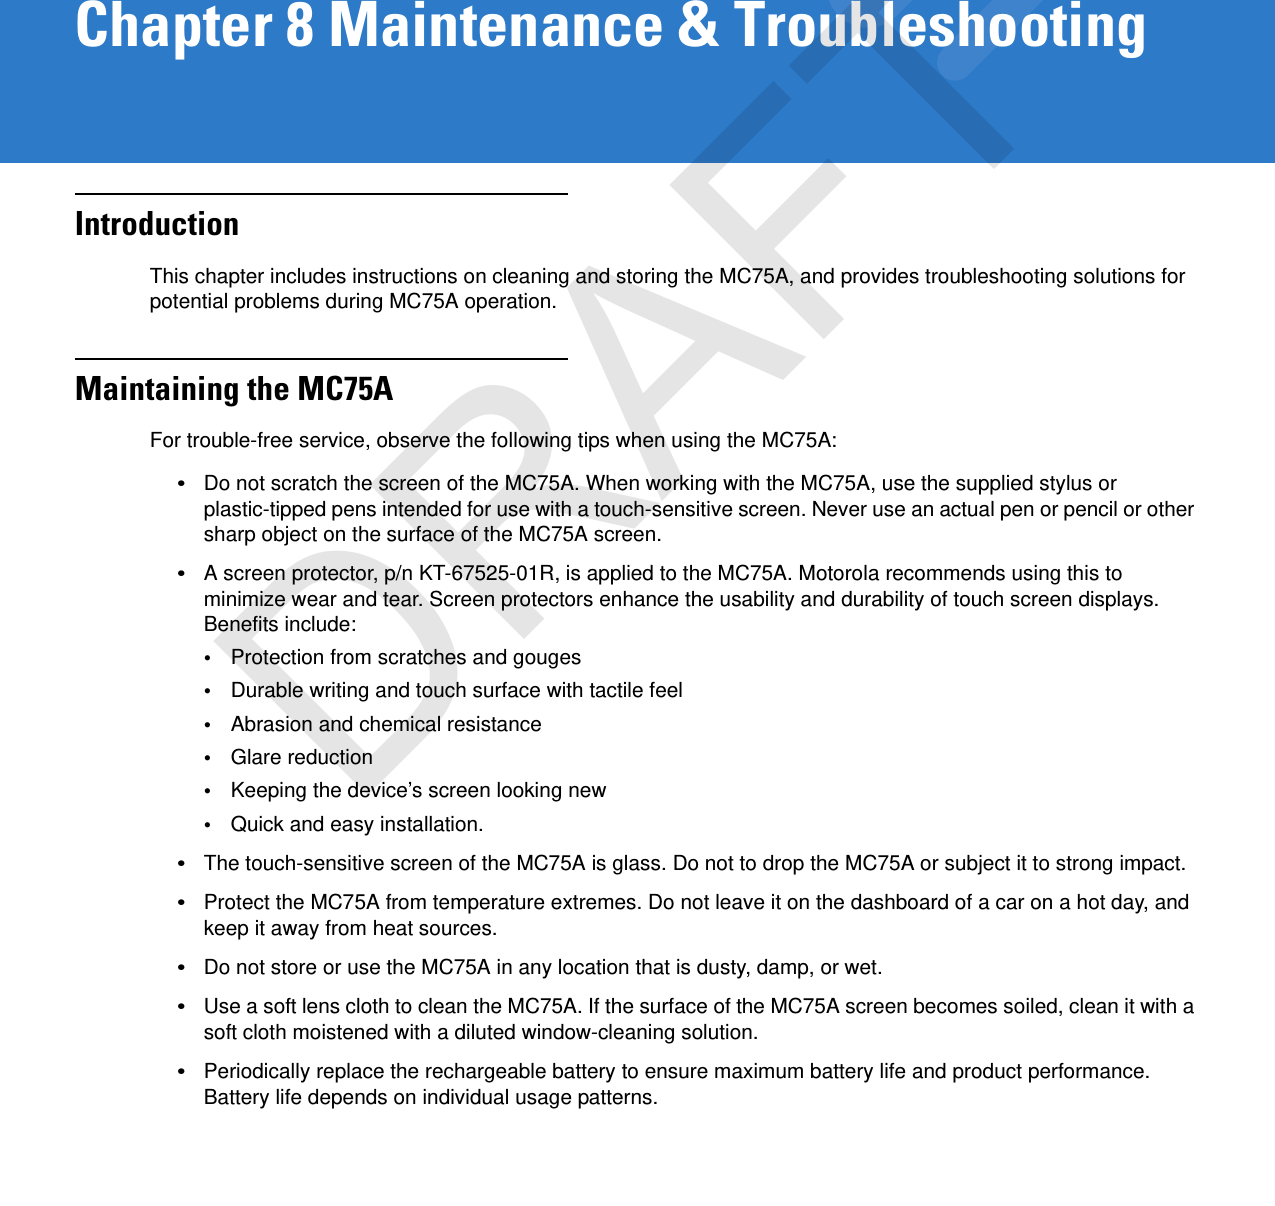 Chapter 8 Maintenance &amp; TroubleshootingIntroductionThis chapter includes instructions on cleaning and storing the MC75A, and provides troubleshooting solutions for potential problems during MC75A operation.Maintaining the MC75AFor trouble-free service, observe the following tips when using the MC75A:•Do not scratch the screen of the MC75A. When working with the MC75A, use the supplied stylus or plastic-tipped pens intended for use with a touch-sensitive screen. Never use an actual pen or pencil or other sharp object on the surface of the MC75A screen.•A screen protector, p/n KT-67525-01R, is applied to the MC75A. Motorola recommends using this to minimize wear and tear. Screen protectors enhance the usability and durability of touch screen displays. Benefits include:•Protection from scratches and gouges•Durable writing and touch surface with tactile feel•Abrasion and chemical resistance•Glare reduction•Keeping the device’s screen looking new•Quick and easy installation.•The touch-sensitive screen of the MC75A is glass. Do not to drop the MC75A or subject it to strong impact.•Protect the MC75A from temperature extremes. Do not leave it on the dashboard of a car on a hot day, and keep it away from heat sources.•Do not store or use the MC75A in any location that is dusty, damp, or wet.•Use a soft lens cloth to clean the MC75A. If the surface of the MC75A screen becomes soiled, clean it with a soft cloth moistened with a diluted window-cleaning solution.•Periodically replace the rechargeable battery to ensure maximum battery life and product performance. Battery life depends on individual usage patterns.DRAFT